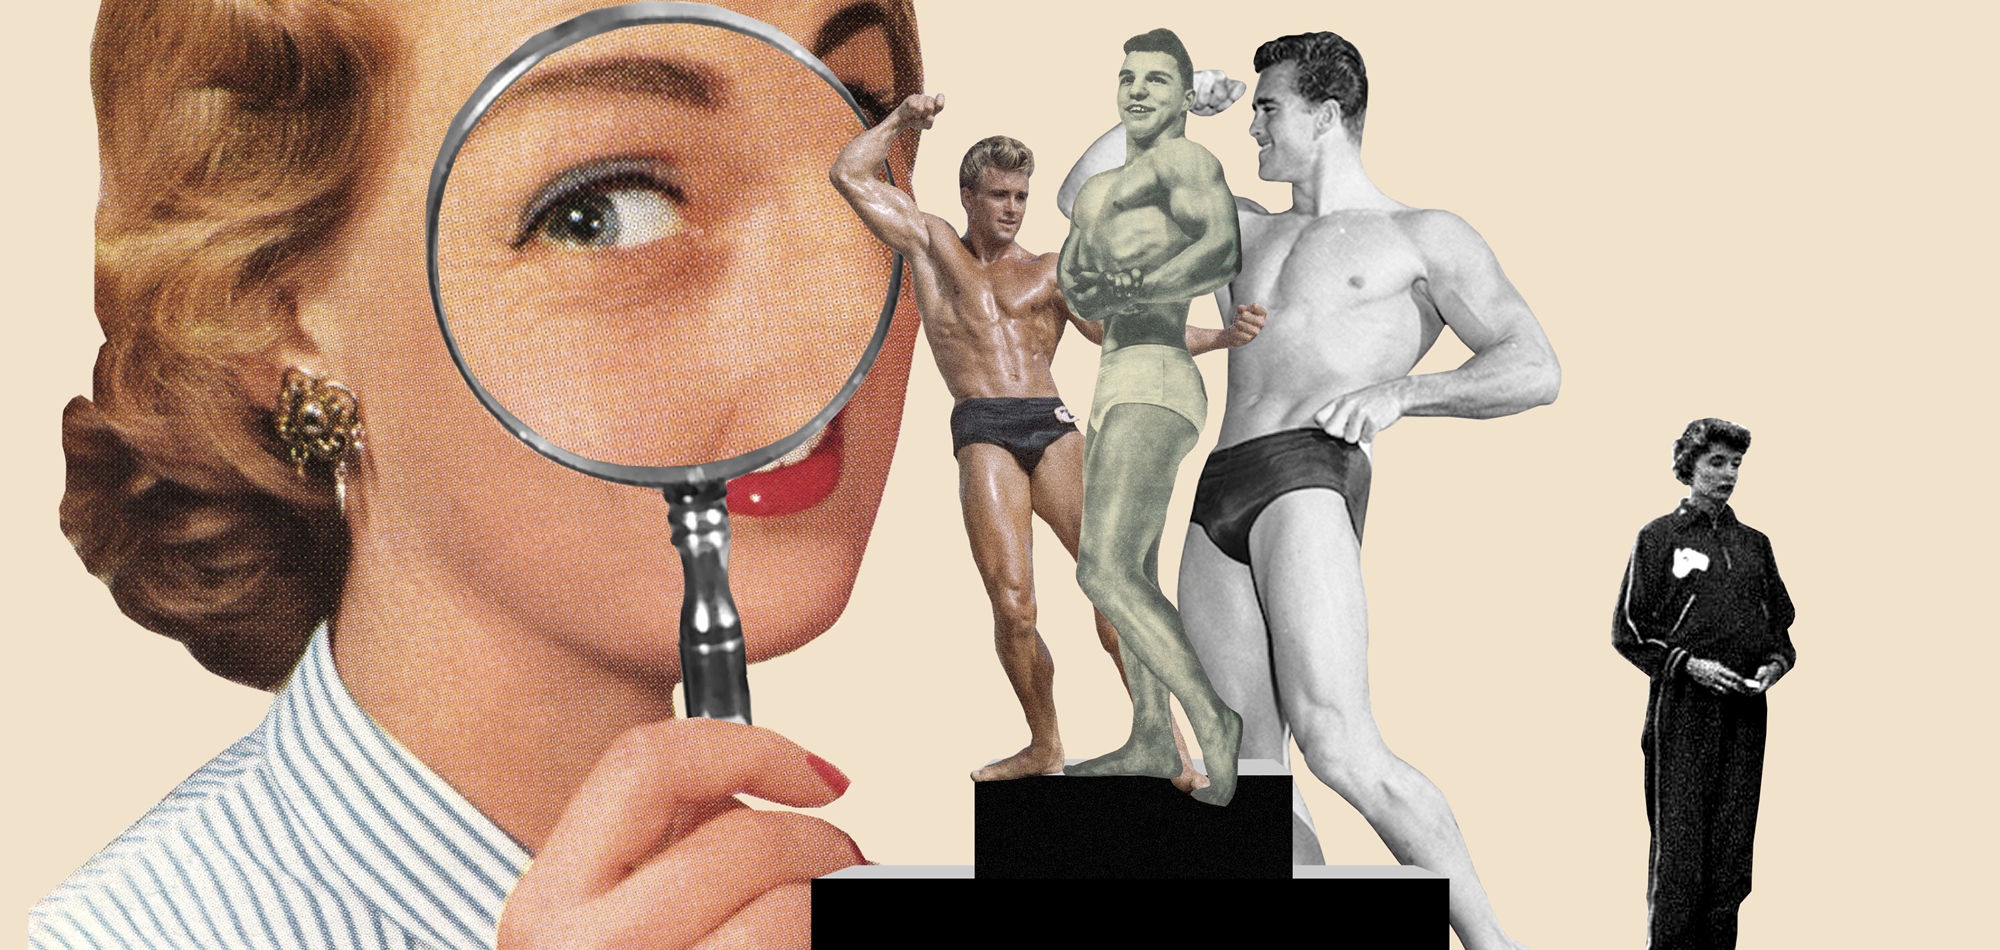 On masculinities, bodies and history